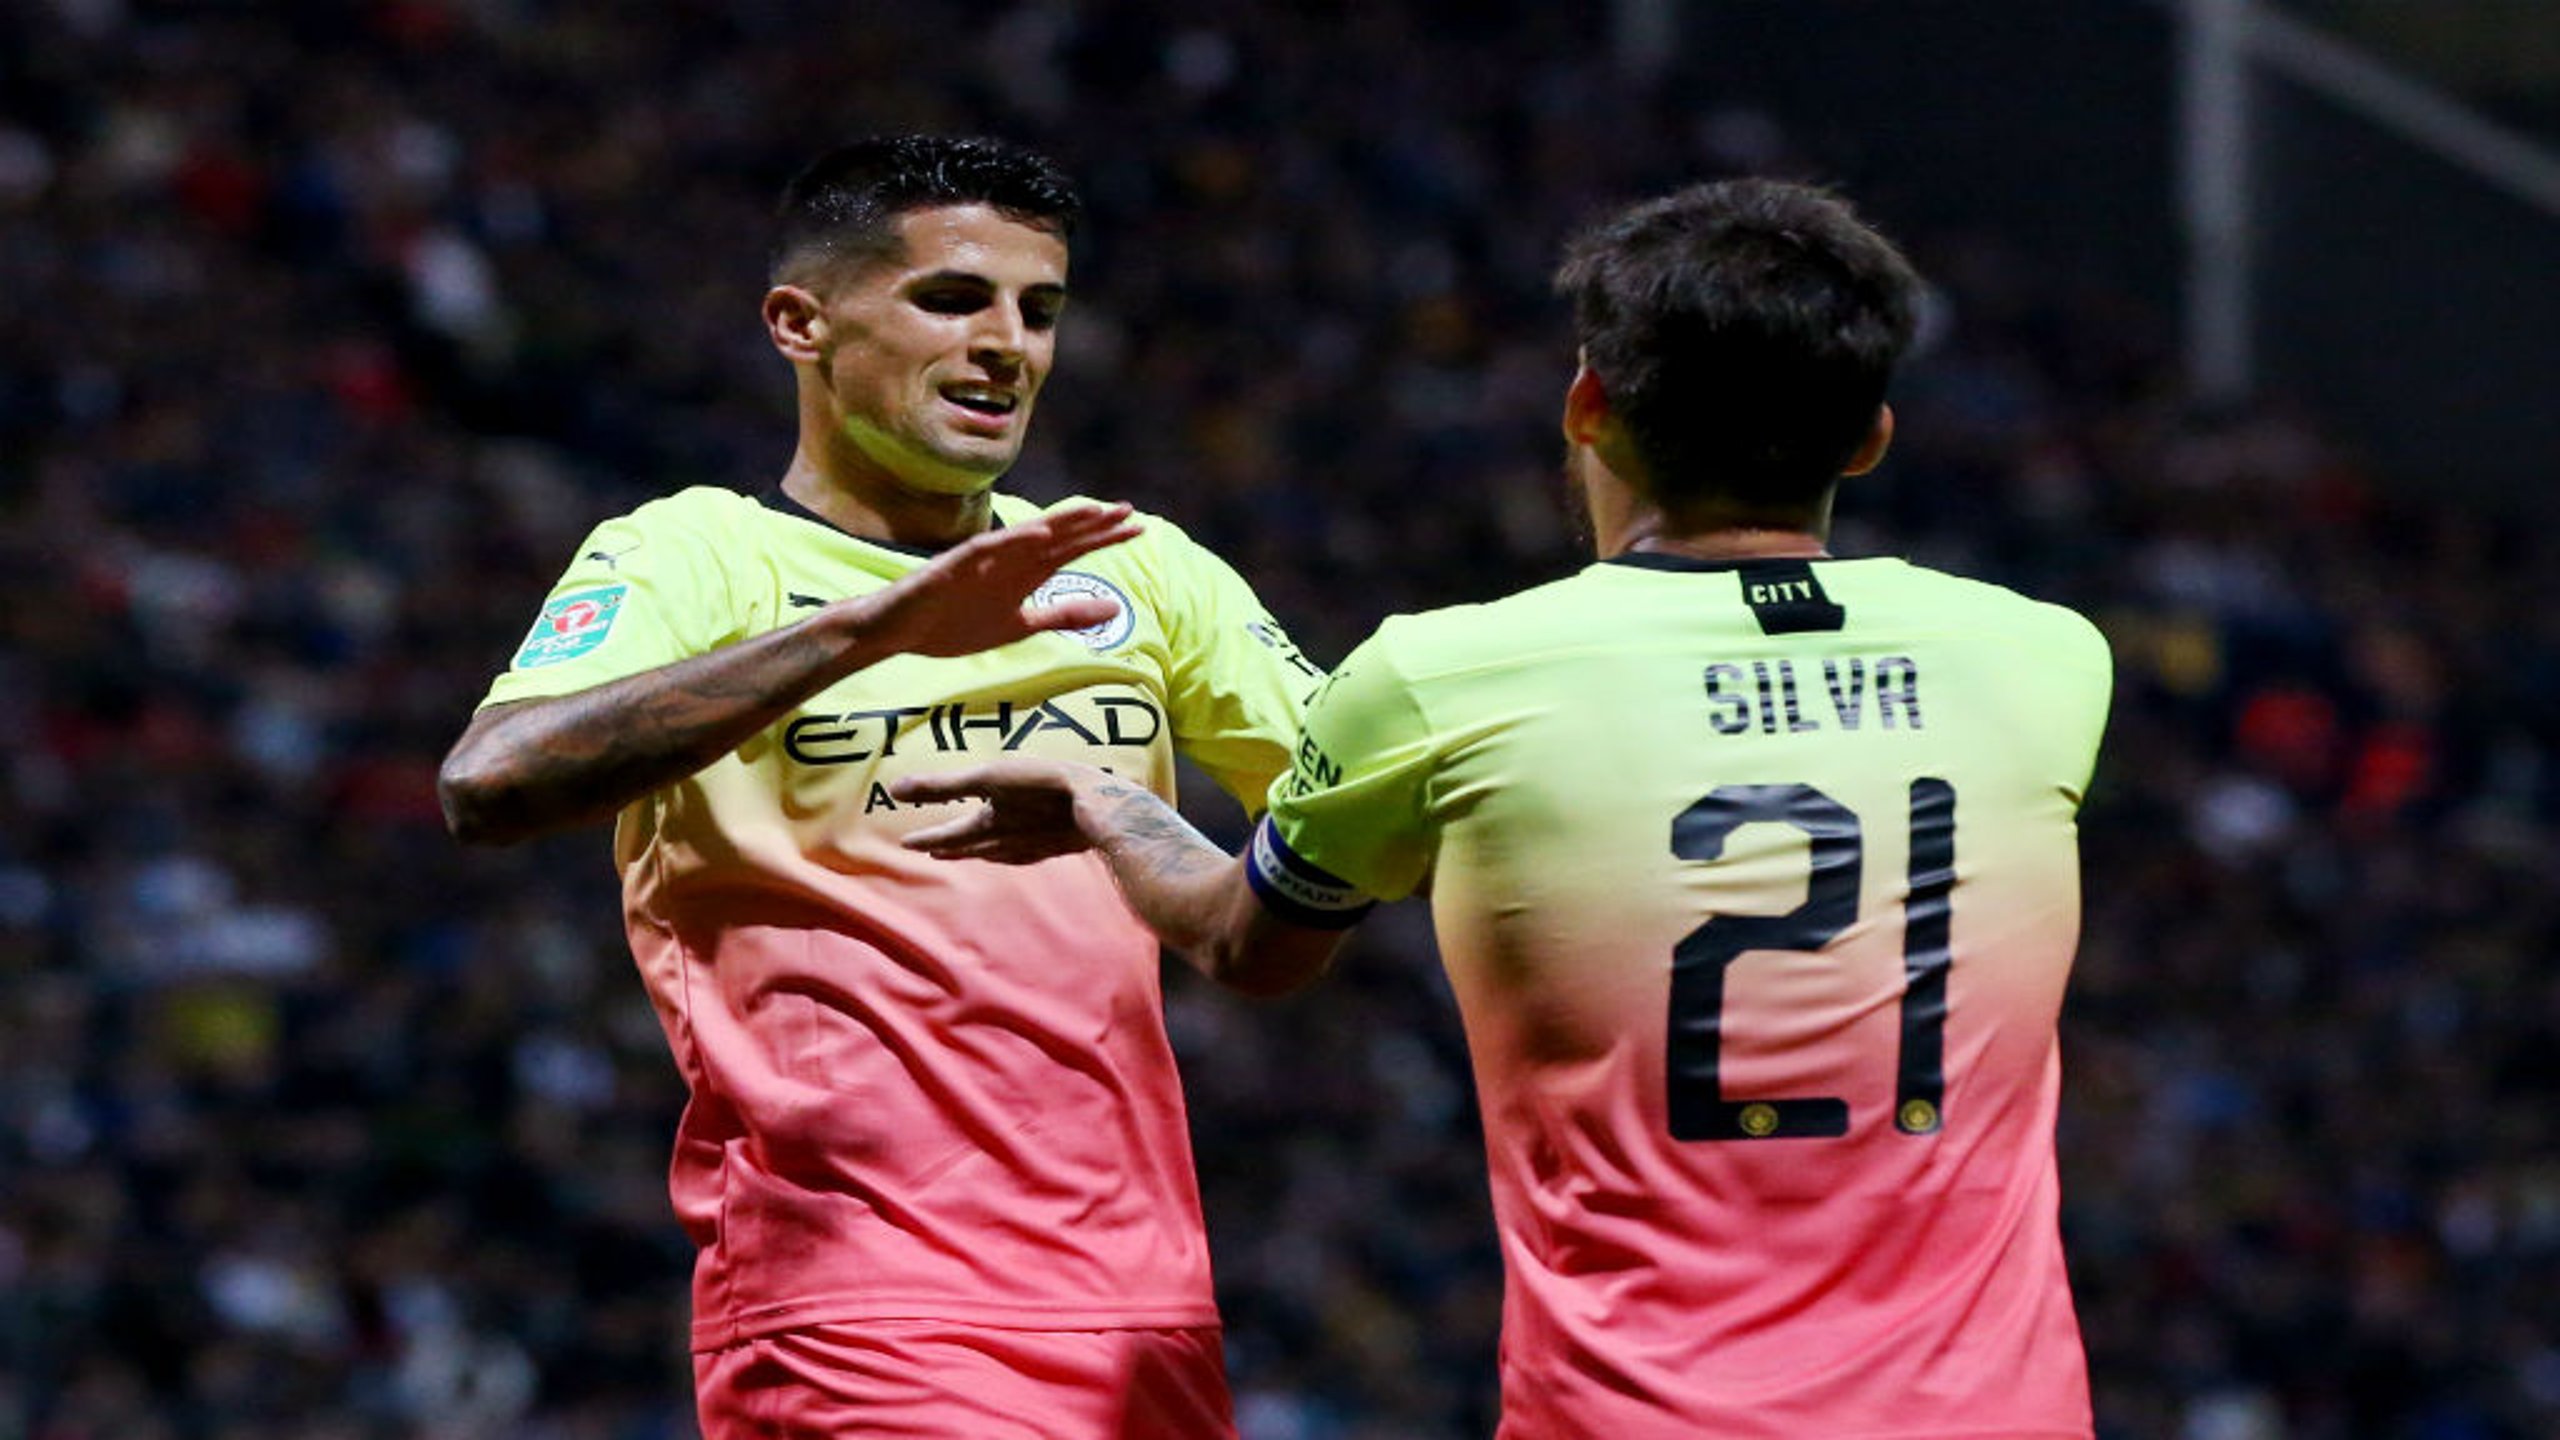 CAPTAIN FANTASTIC: Joao Cancelo celebrates with skipper David Silva, who orchestrated our third goal 